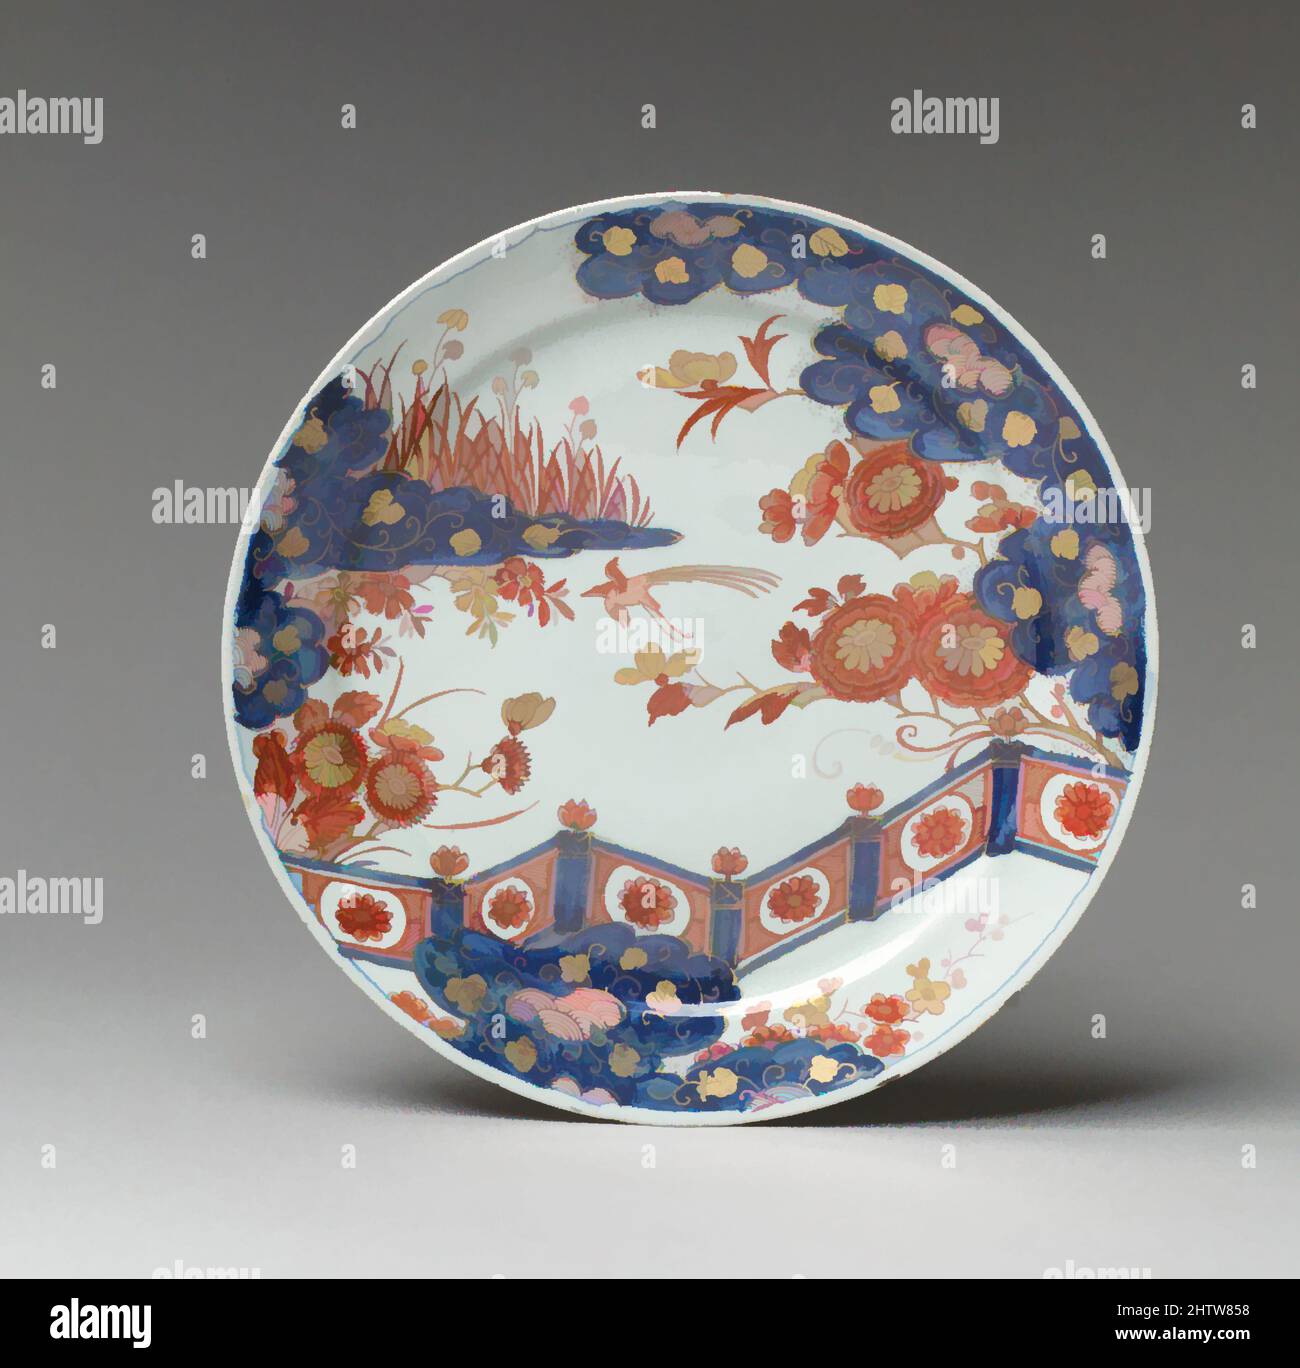 Art inspired by Plate, ca. 1690, Dutch, Delft, Tin-glazed earthenware, Diameter: 8 5/8 in. (21.9 cm), Ceramics-Pottery, Classic works modernized by Artotop with a splash of modernity. Shapes, color and value, eye-catching visual impact on art. Emotions through freedom of artworks in a contemporary way. A timeless message pursuing a wildly creative new direction. Artists turning to the digital medium and creating the Artotop NFT Stock Photo